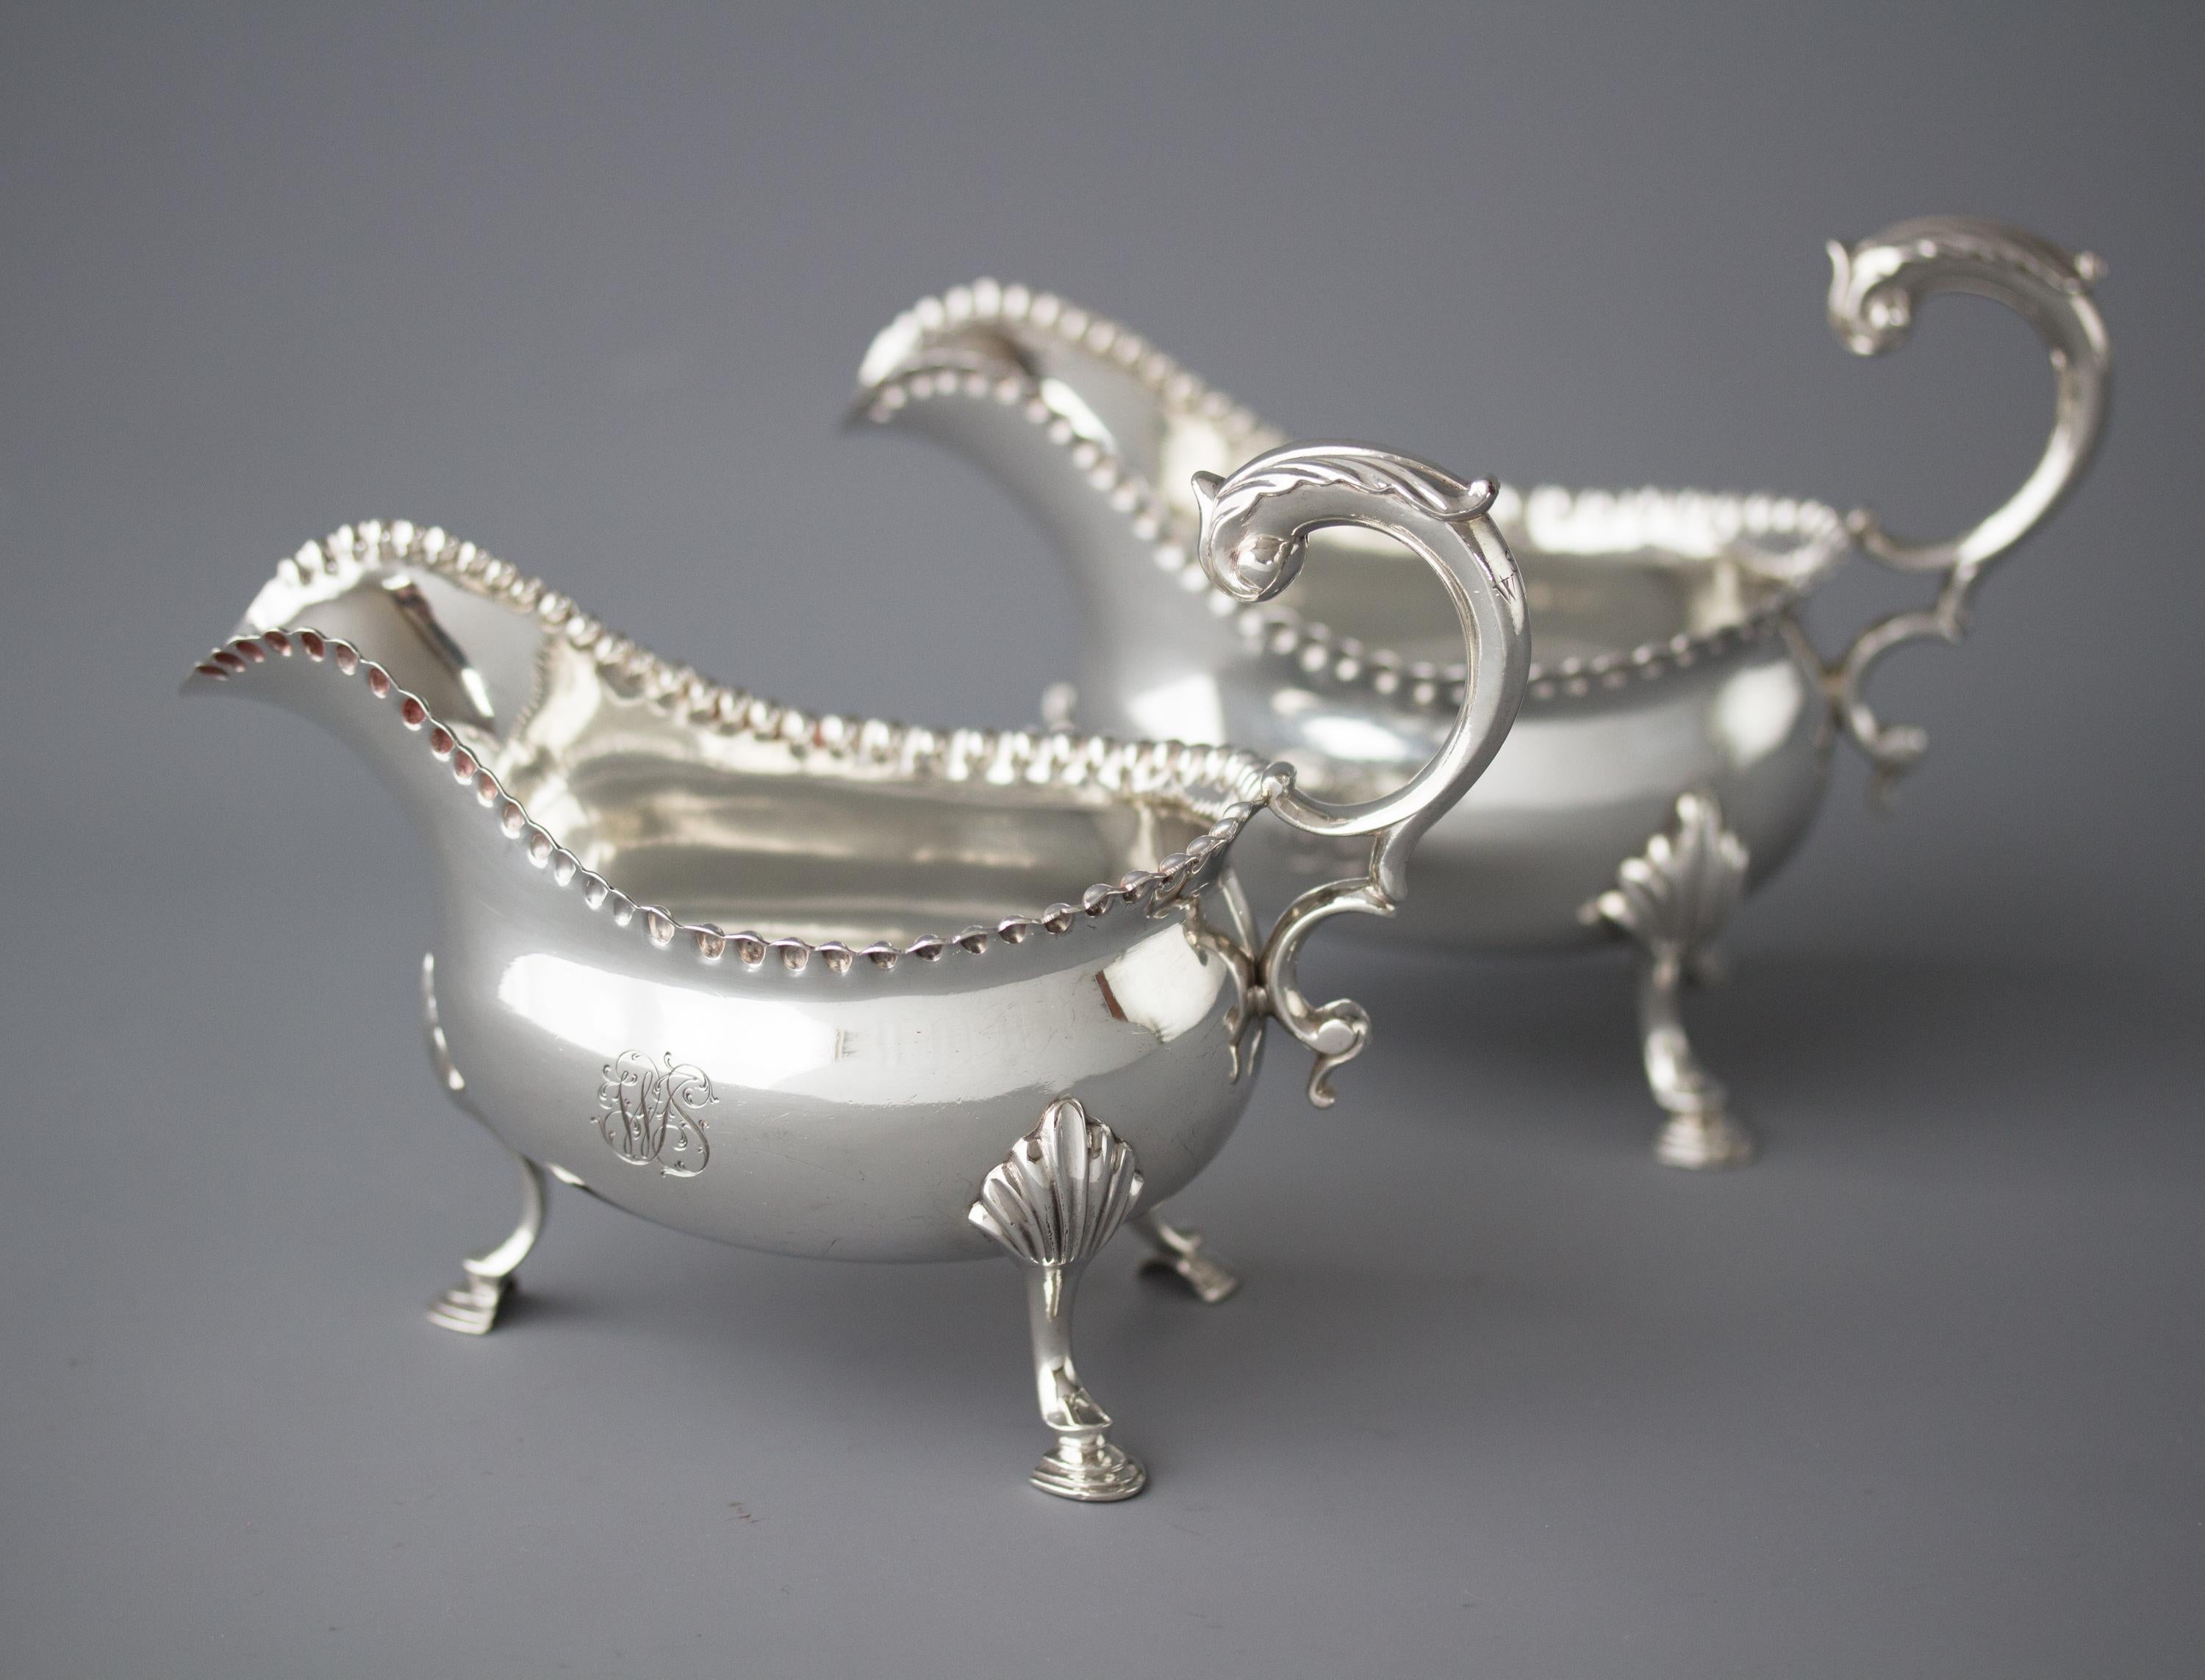 A very fine pair of George III silver sauce boats by William & James Priest. Of plain oval form, with raised bead decoration to the rim. A flying C-scrolled handle mounted with and acanthus leaf. Standing on three shell and hoof legs. Engraved with